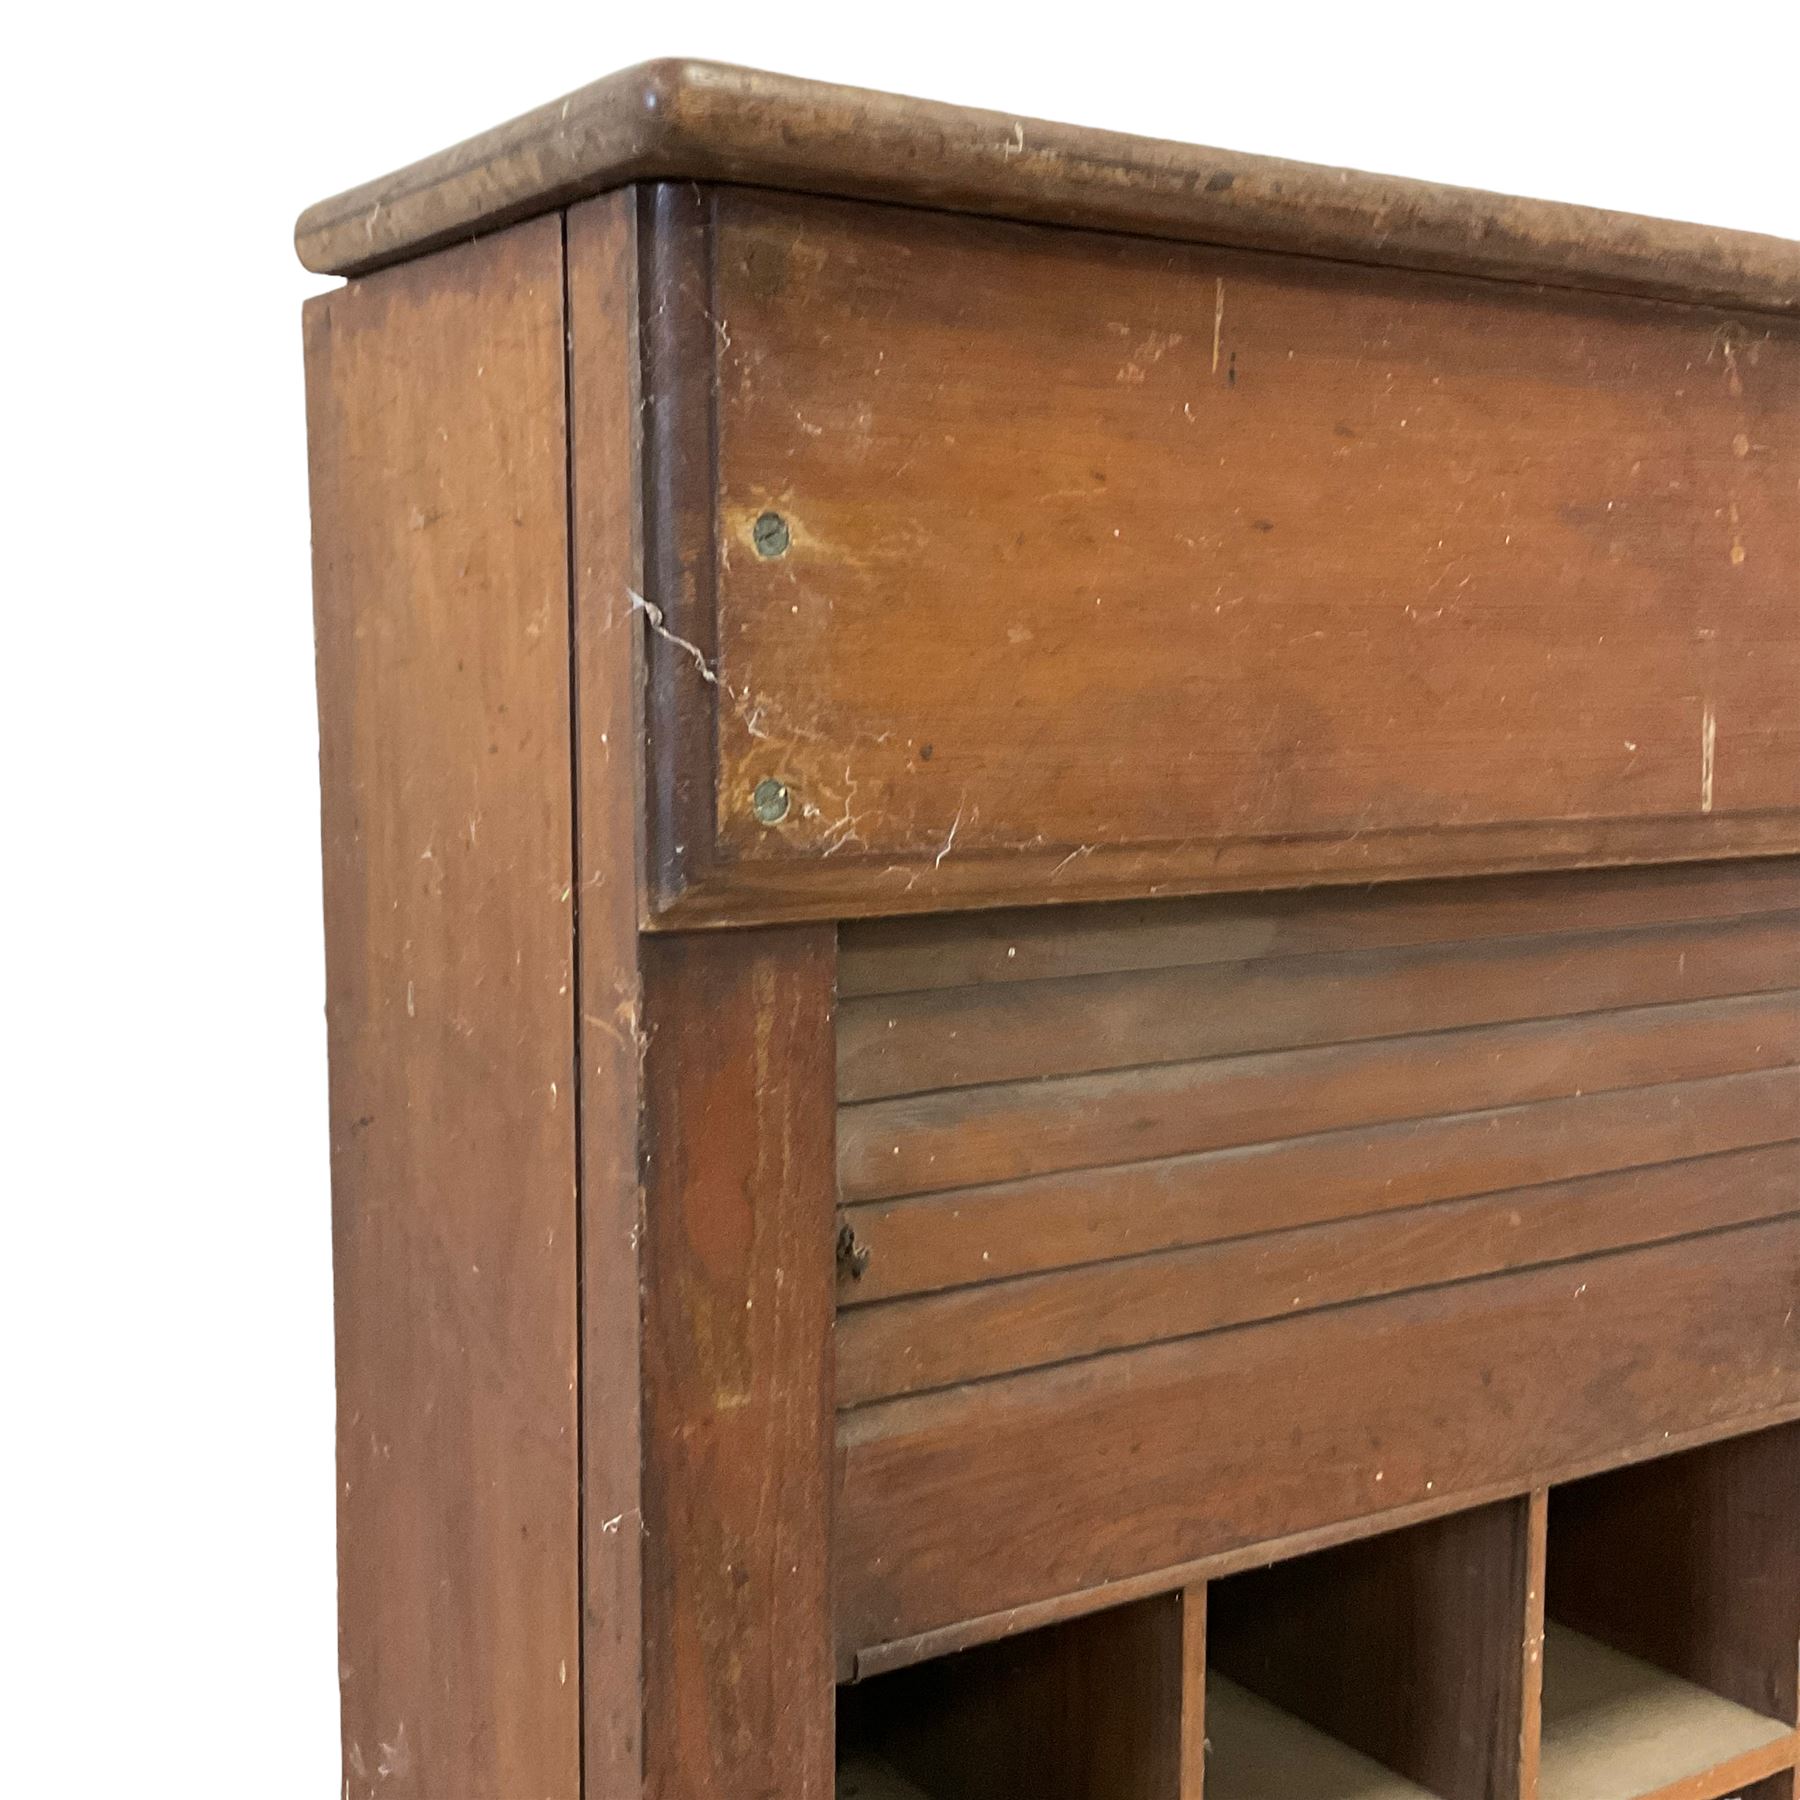 19th century oak hotel or post office pigeonhole cabinet - Image 5 of 6